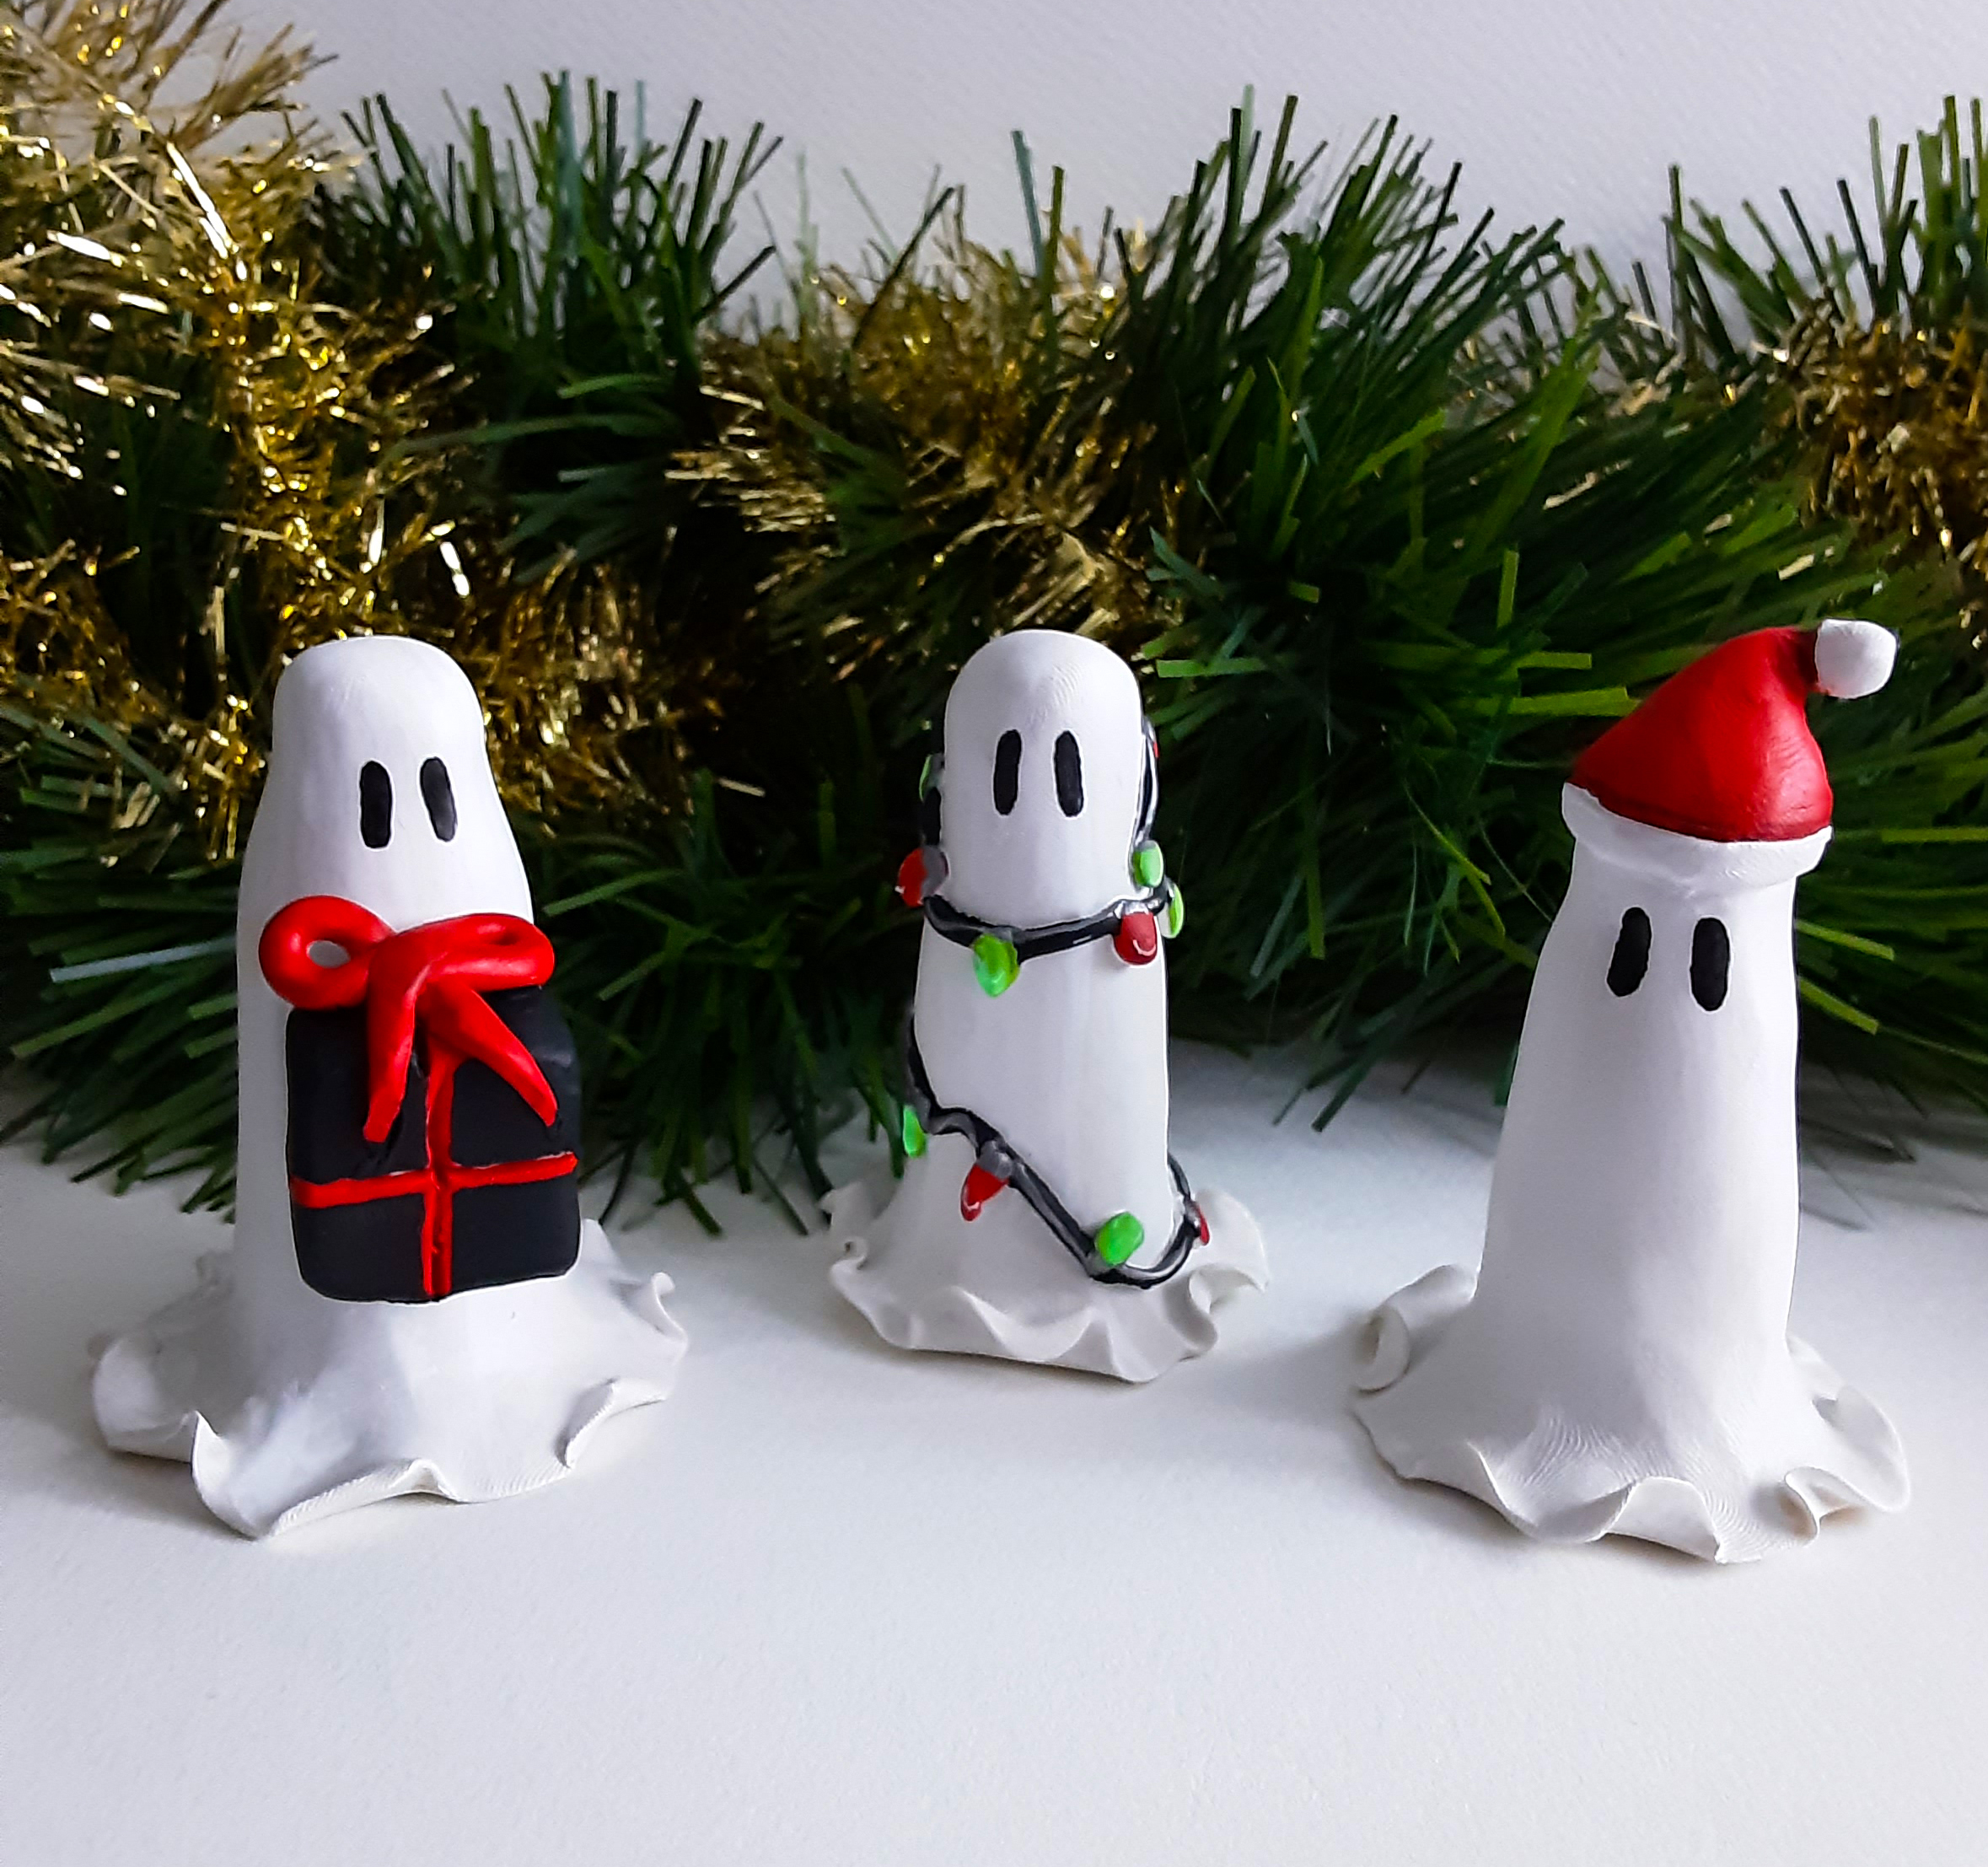 adopt-a-ghost-holiday-set-3